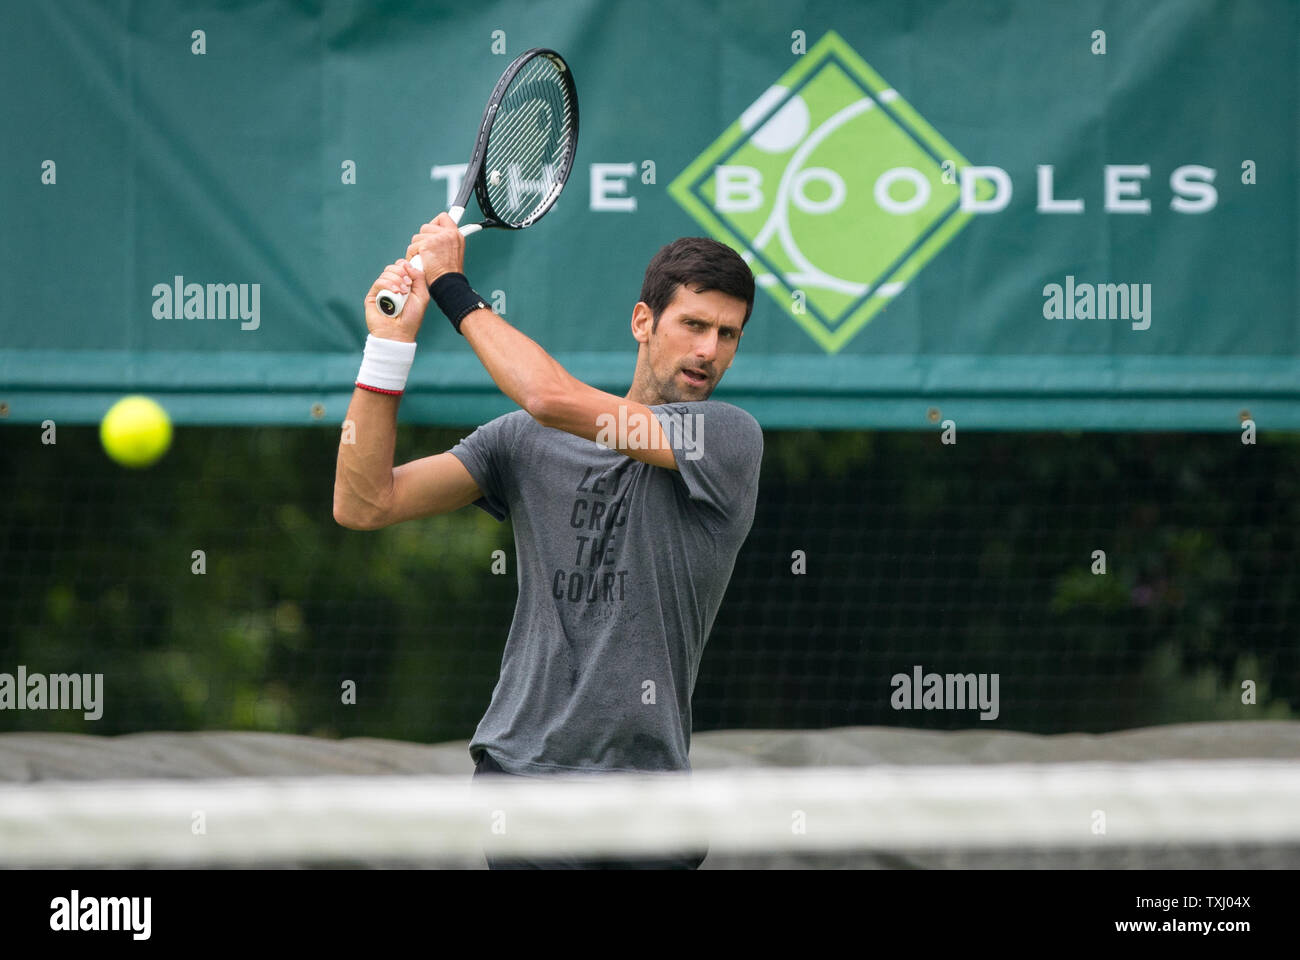 slough-uk-25th-june-2019-novak-djokovic-of-serbia-practice-session-during-the-the-boodles-tennis-2019-event-at-stoke-park-slough-england-on-25-june-2019-photo-by-andy-rowland-credit-prime-media-imagesalamy-live-news-TXJ04X.jpg